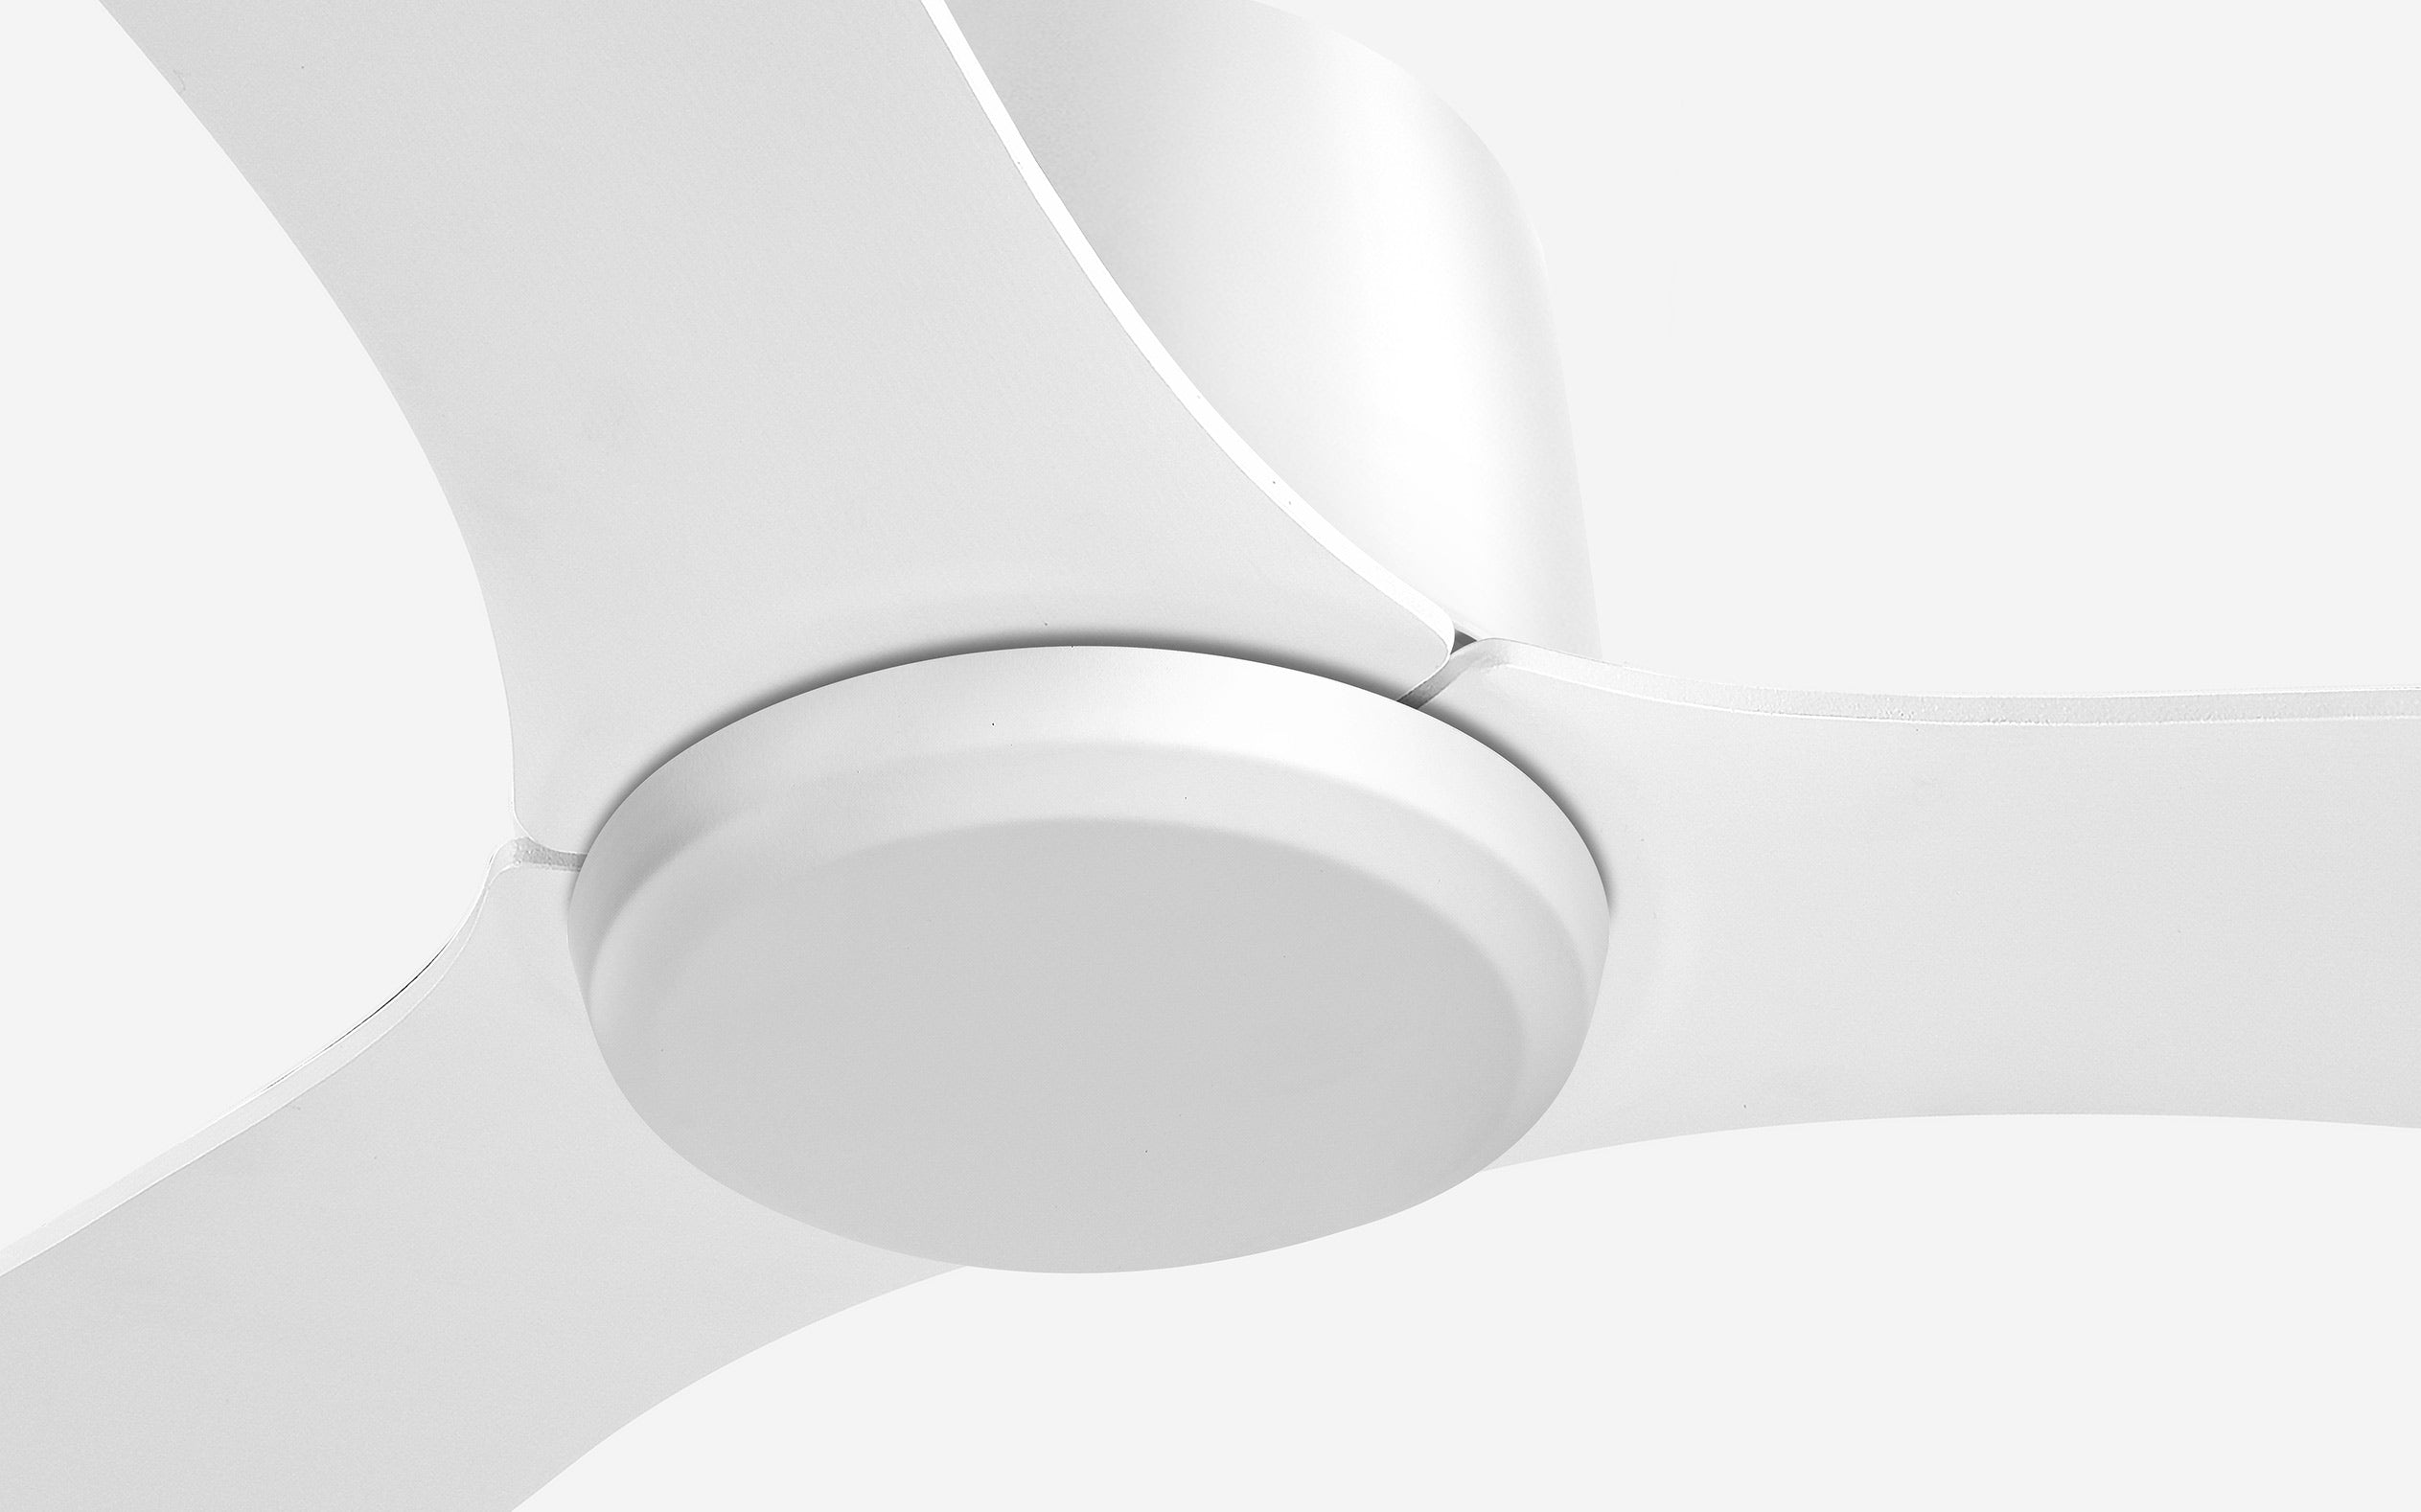 Diamond Storm Ceiling Fan - #Body Color_White|Blade Color_White|Blade Size_56"